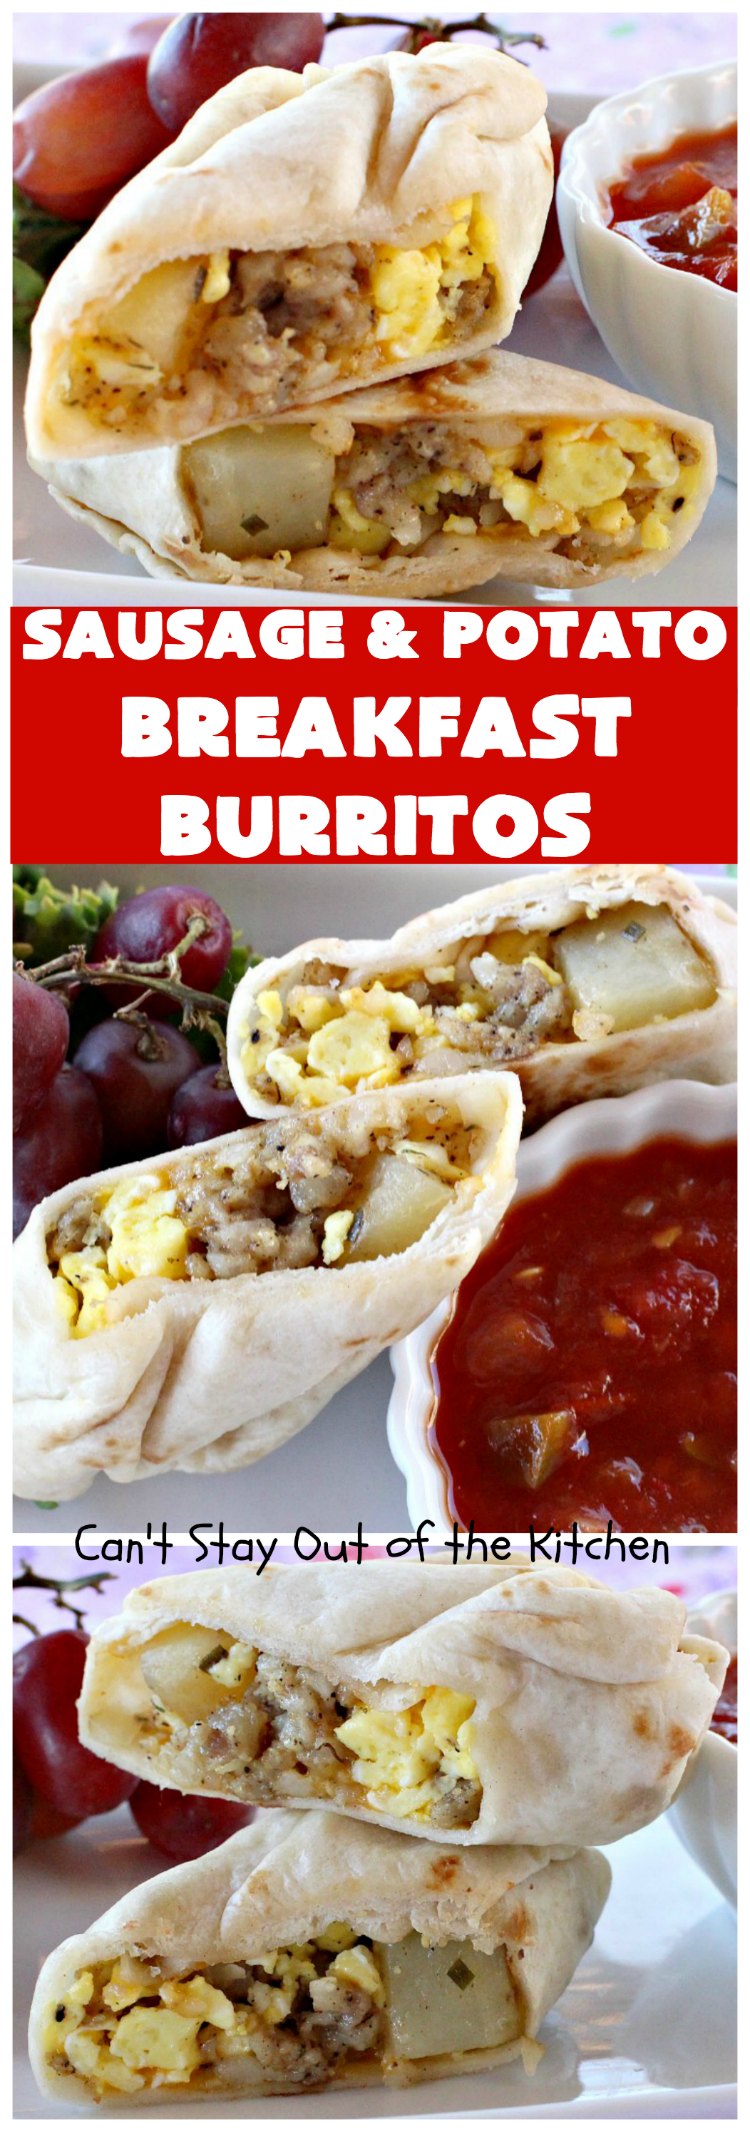 Sausage and Potato Breakfast Burritos | Can't Stay Out of the Kitchen